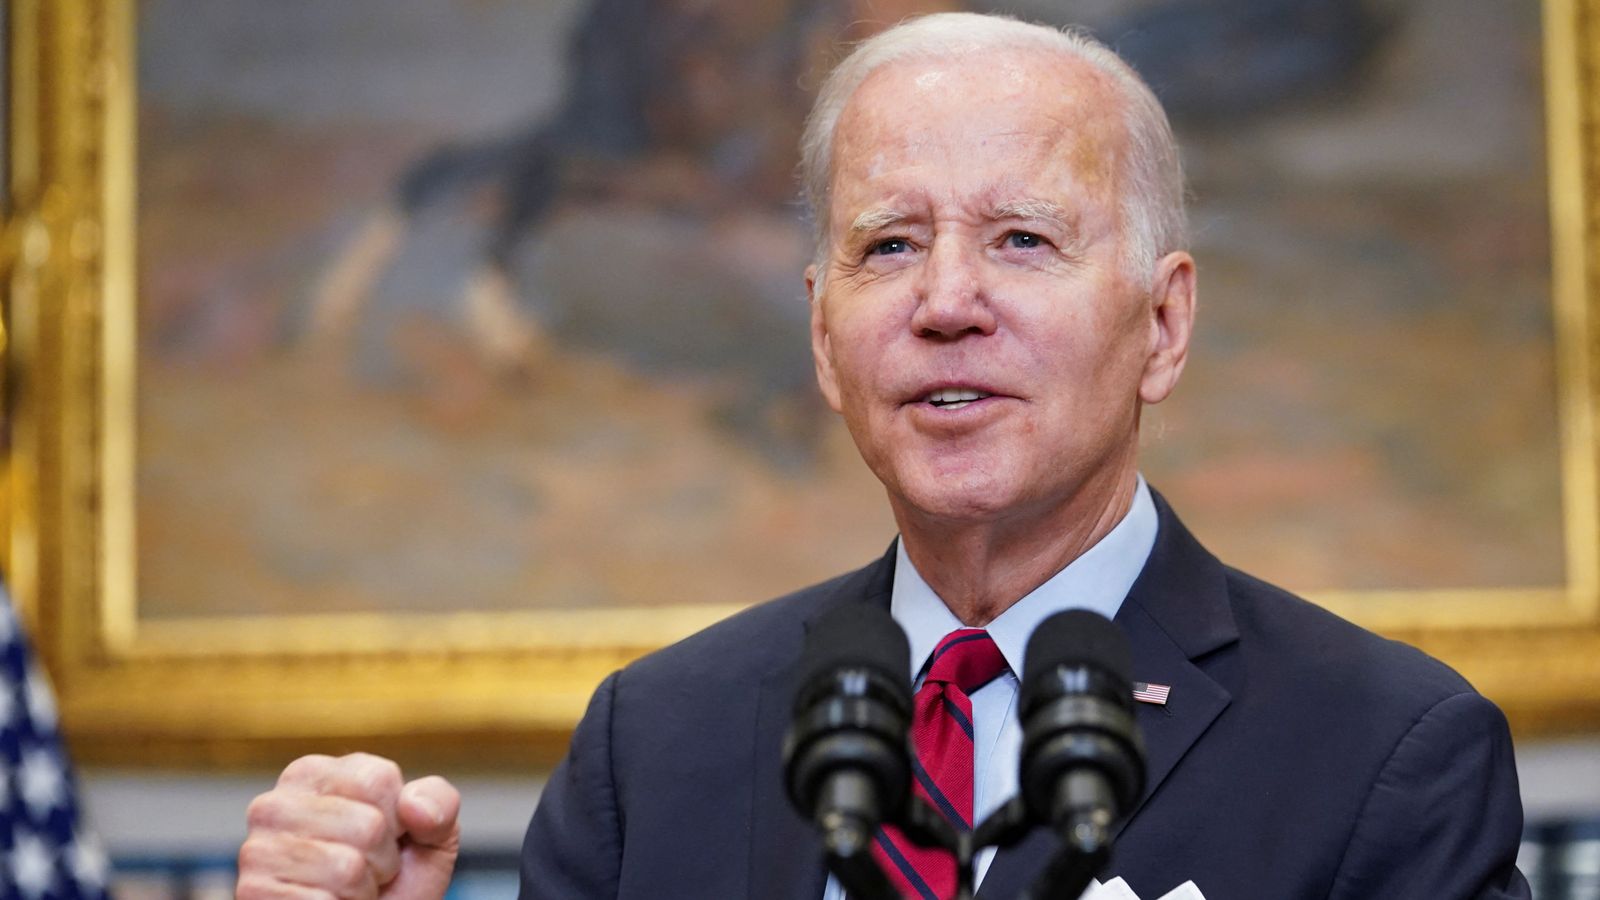 Second batch of classified Joe Biden documents discovered at new location